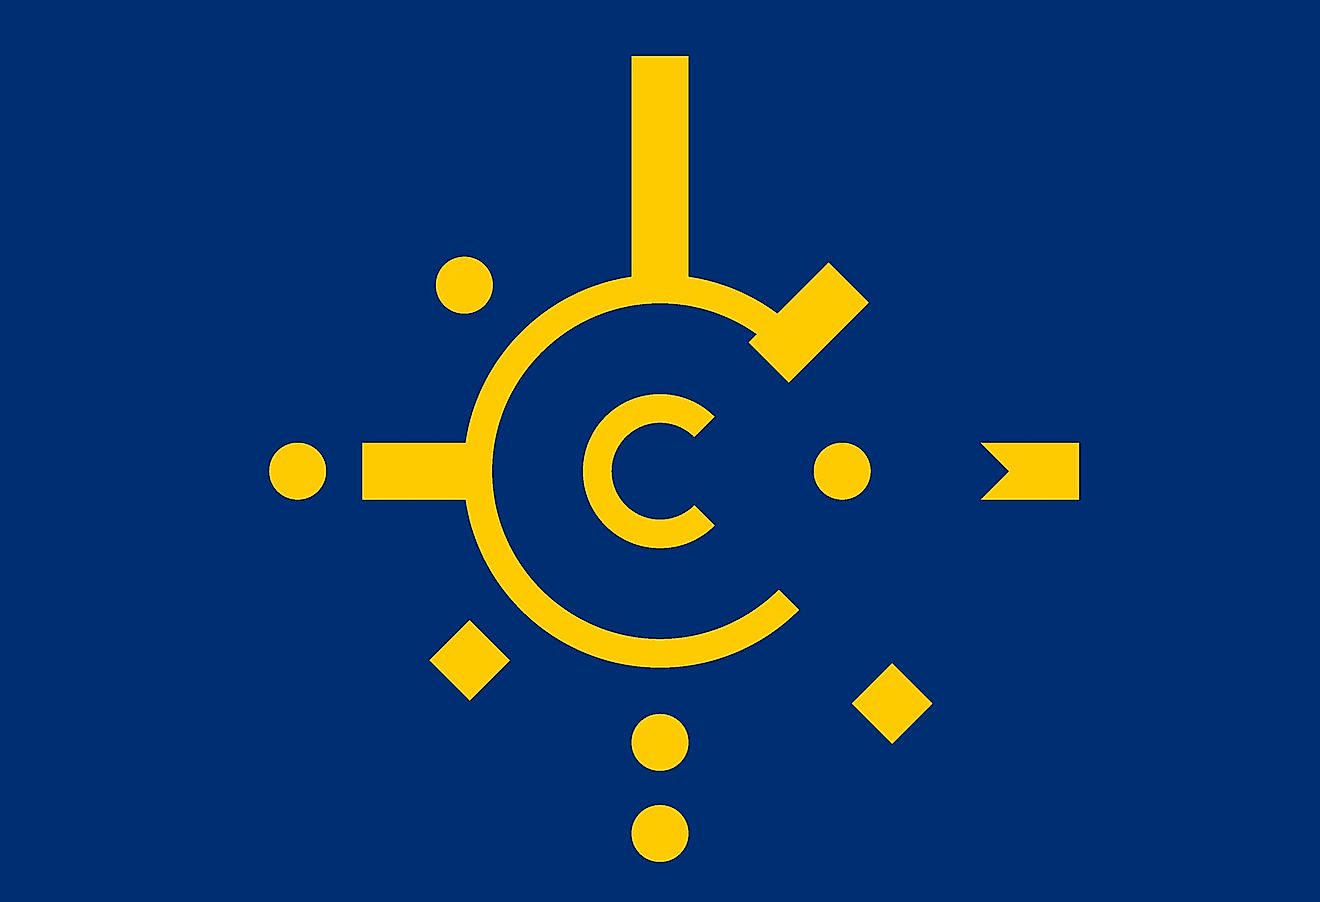 The flag of the Central European Free Trade Agreement. 